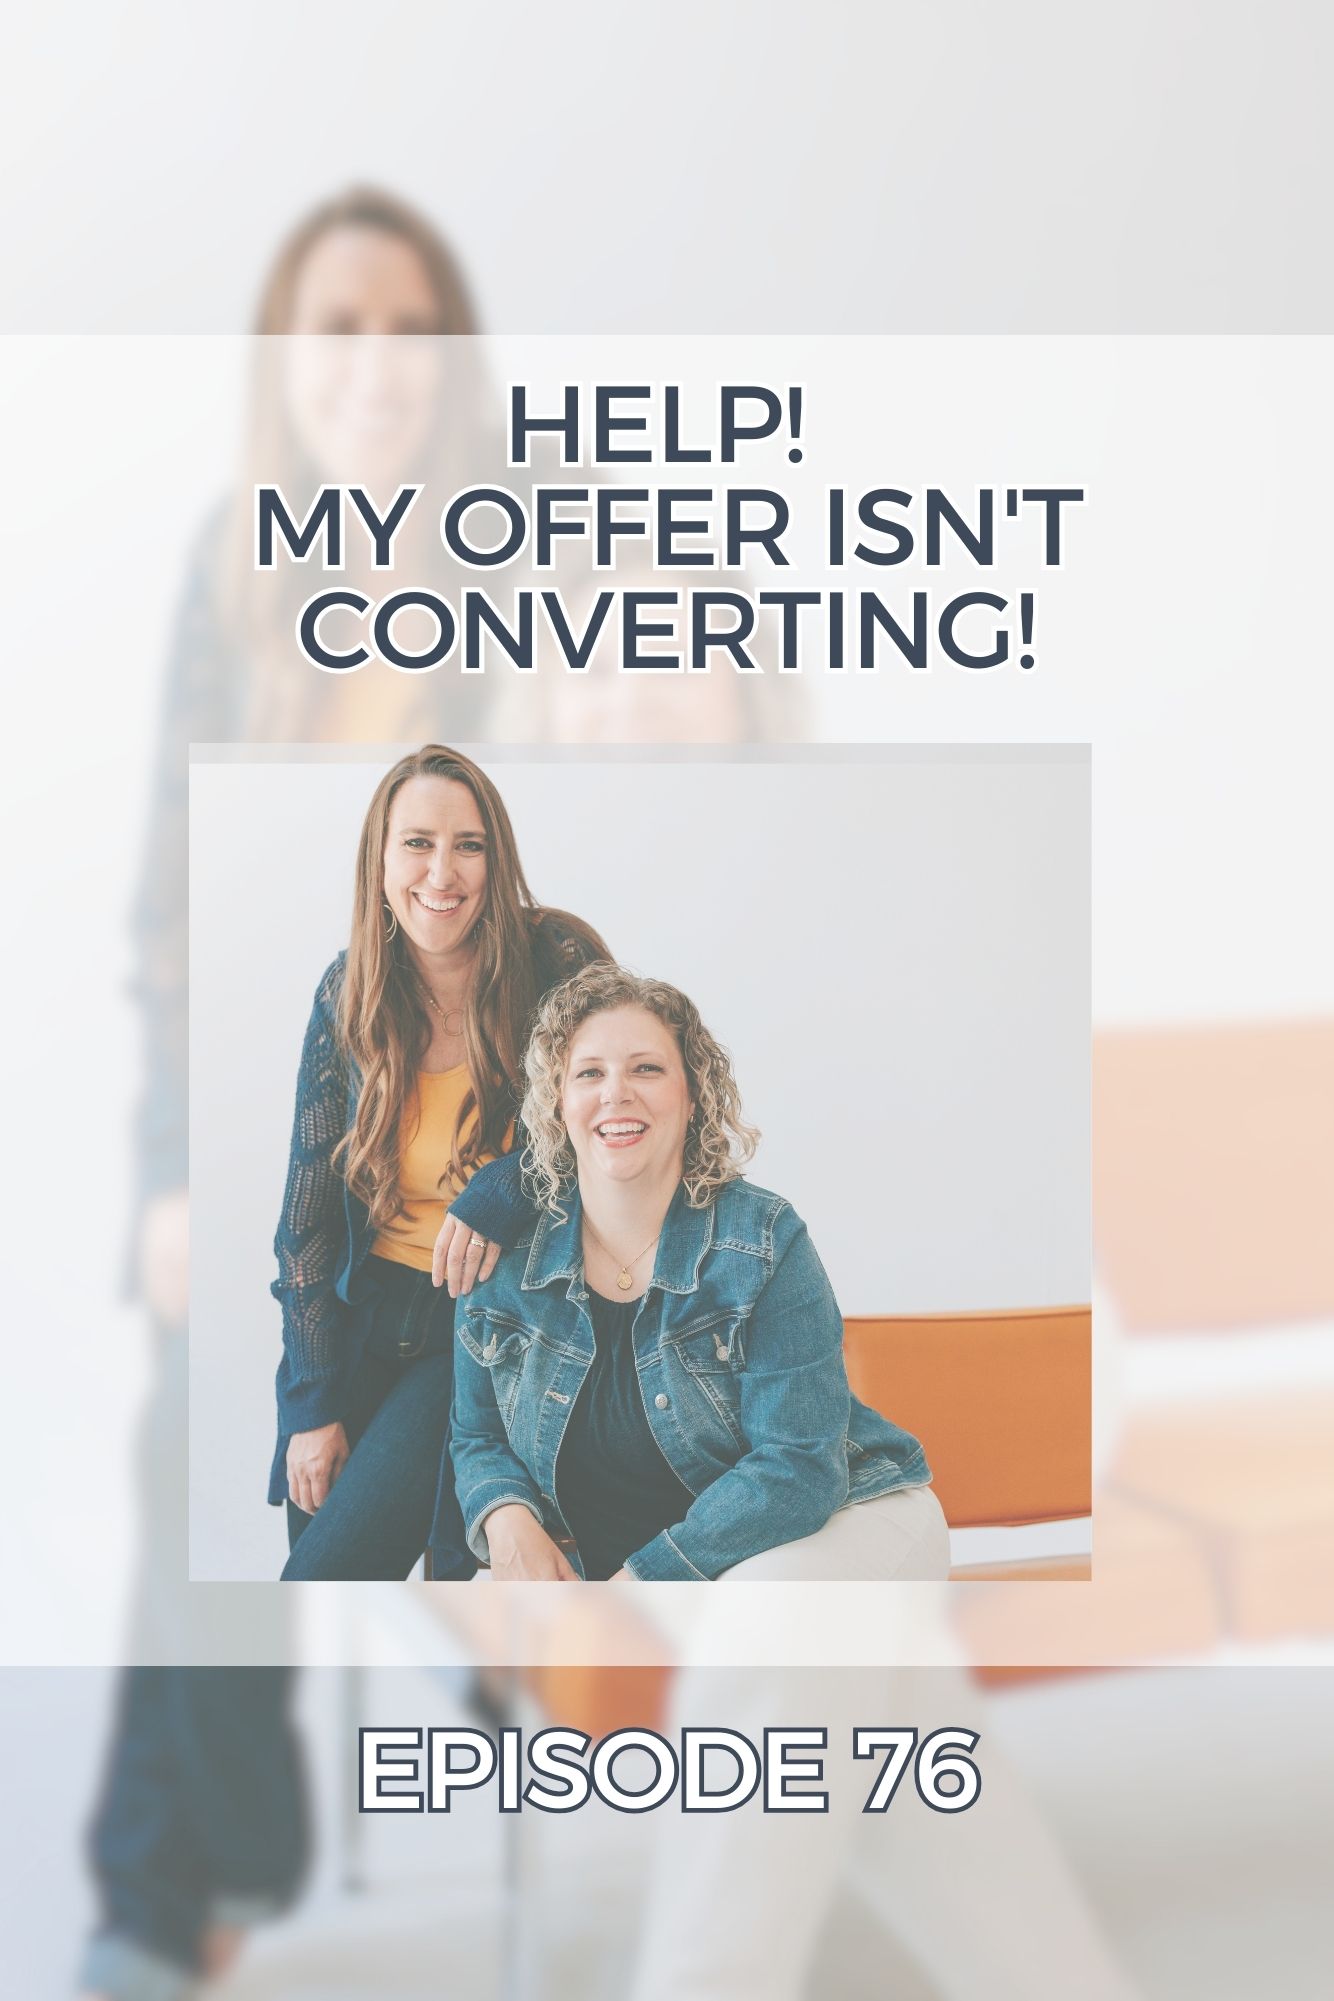 A picture of two woman Christian business owners and podcasters looking at the camera with a description that says "Help! My offer isn't converting".